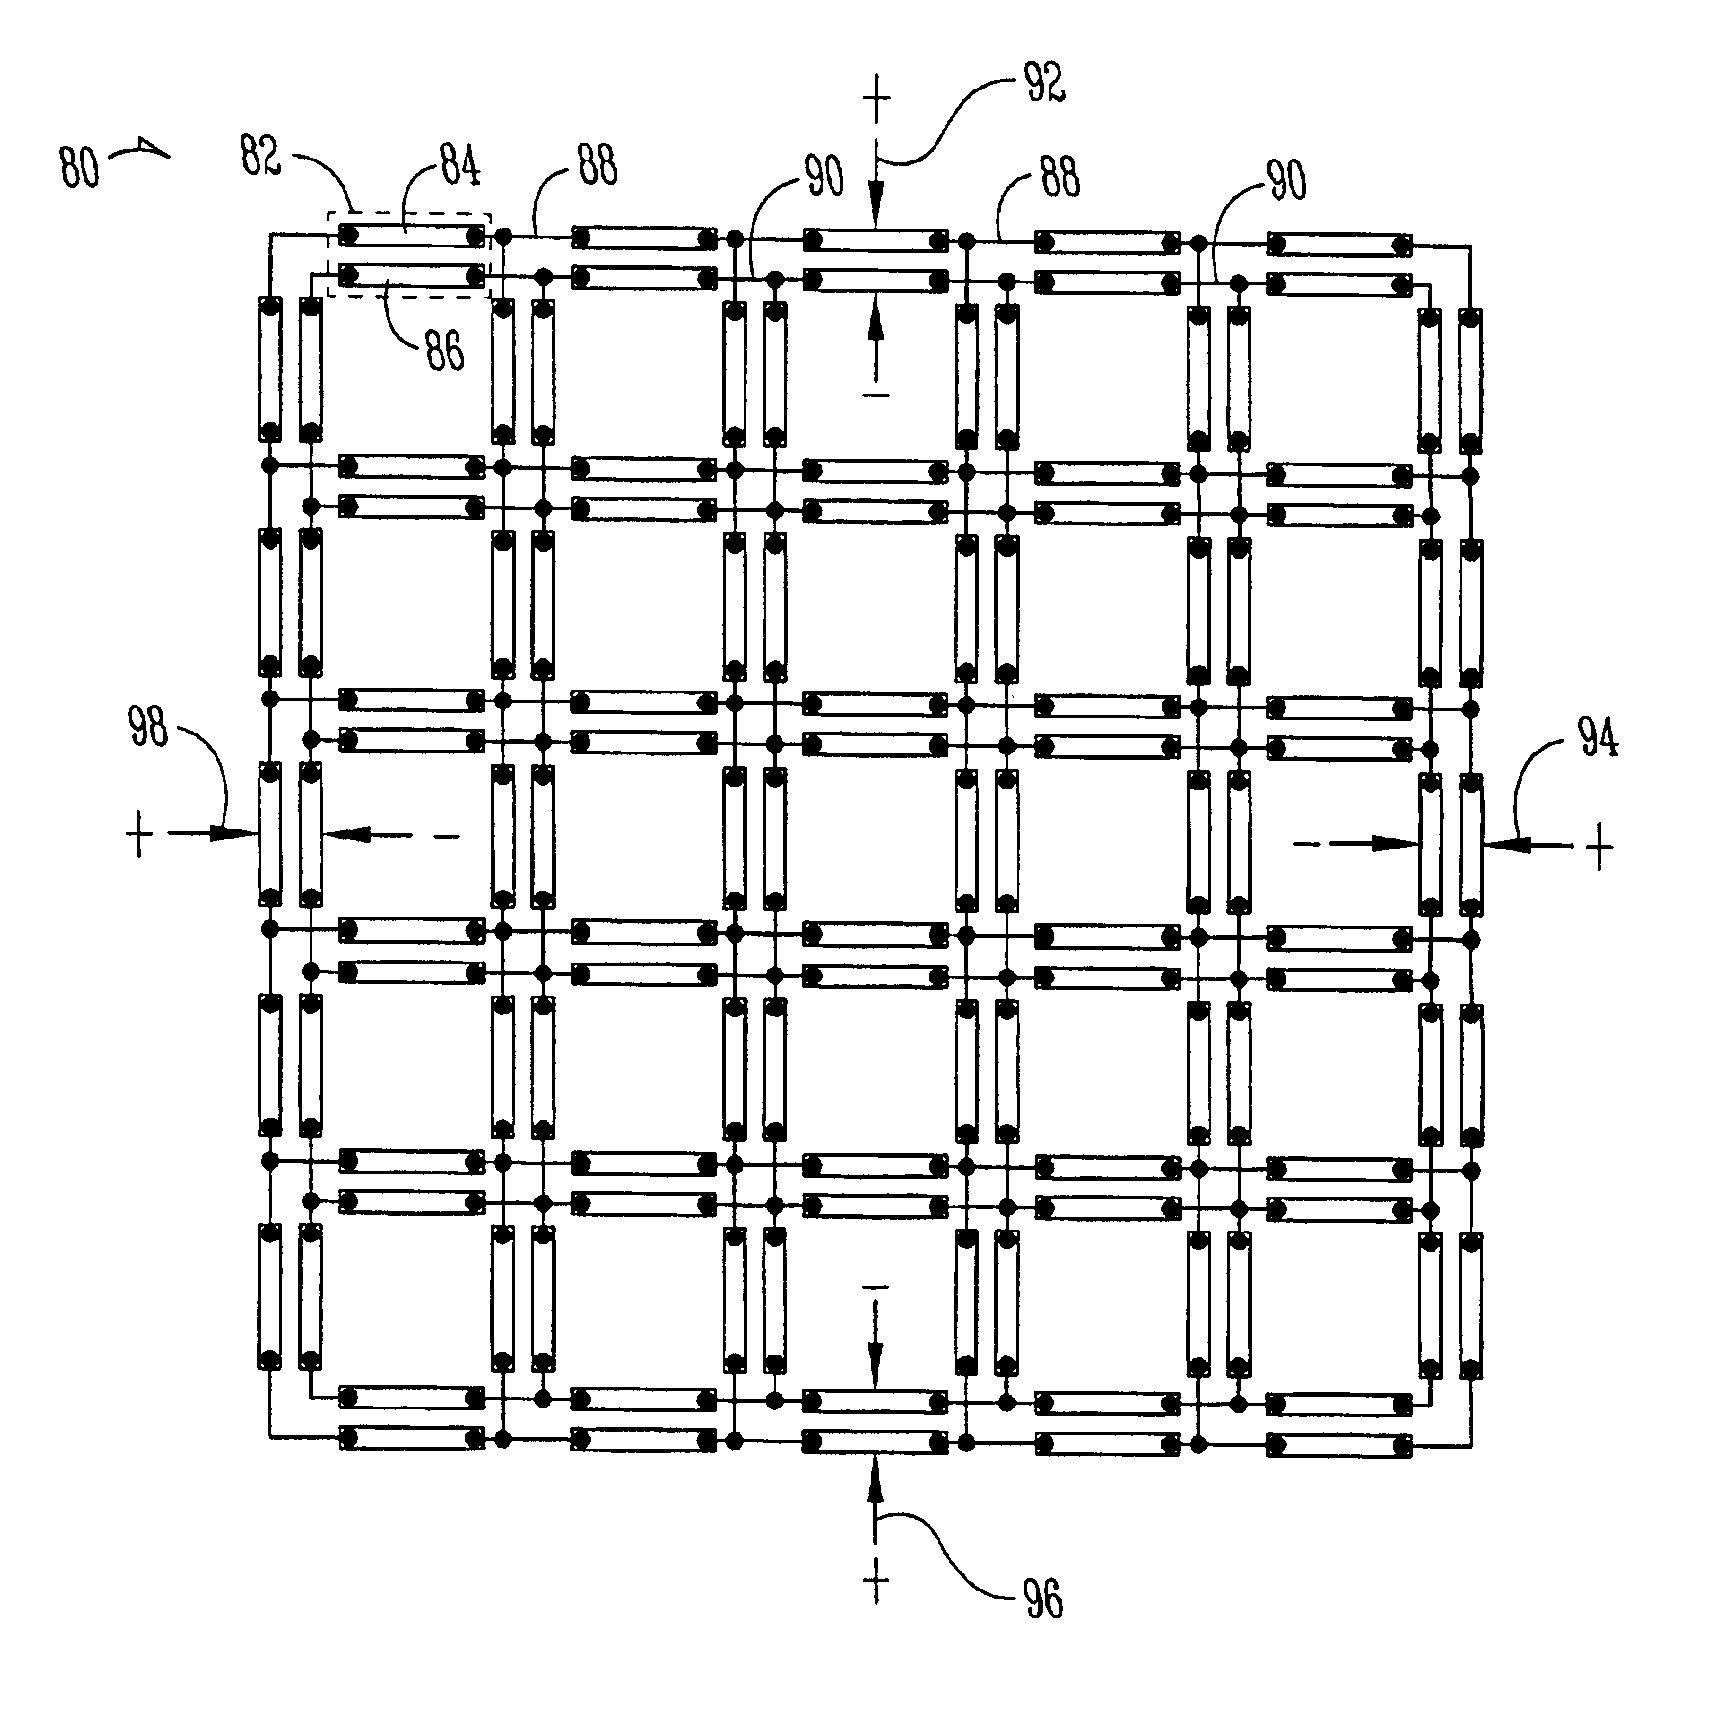 Low loss interconnect structure for use in microelectronic circuits